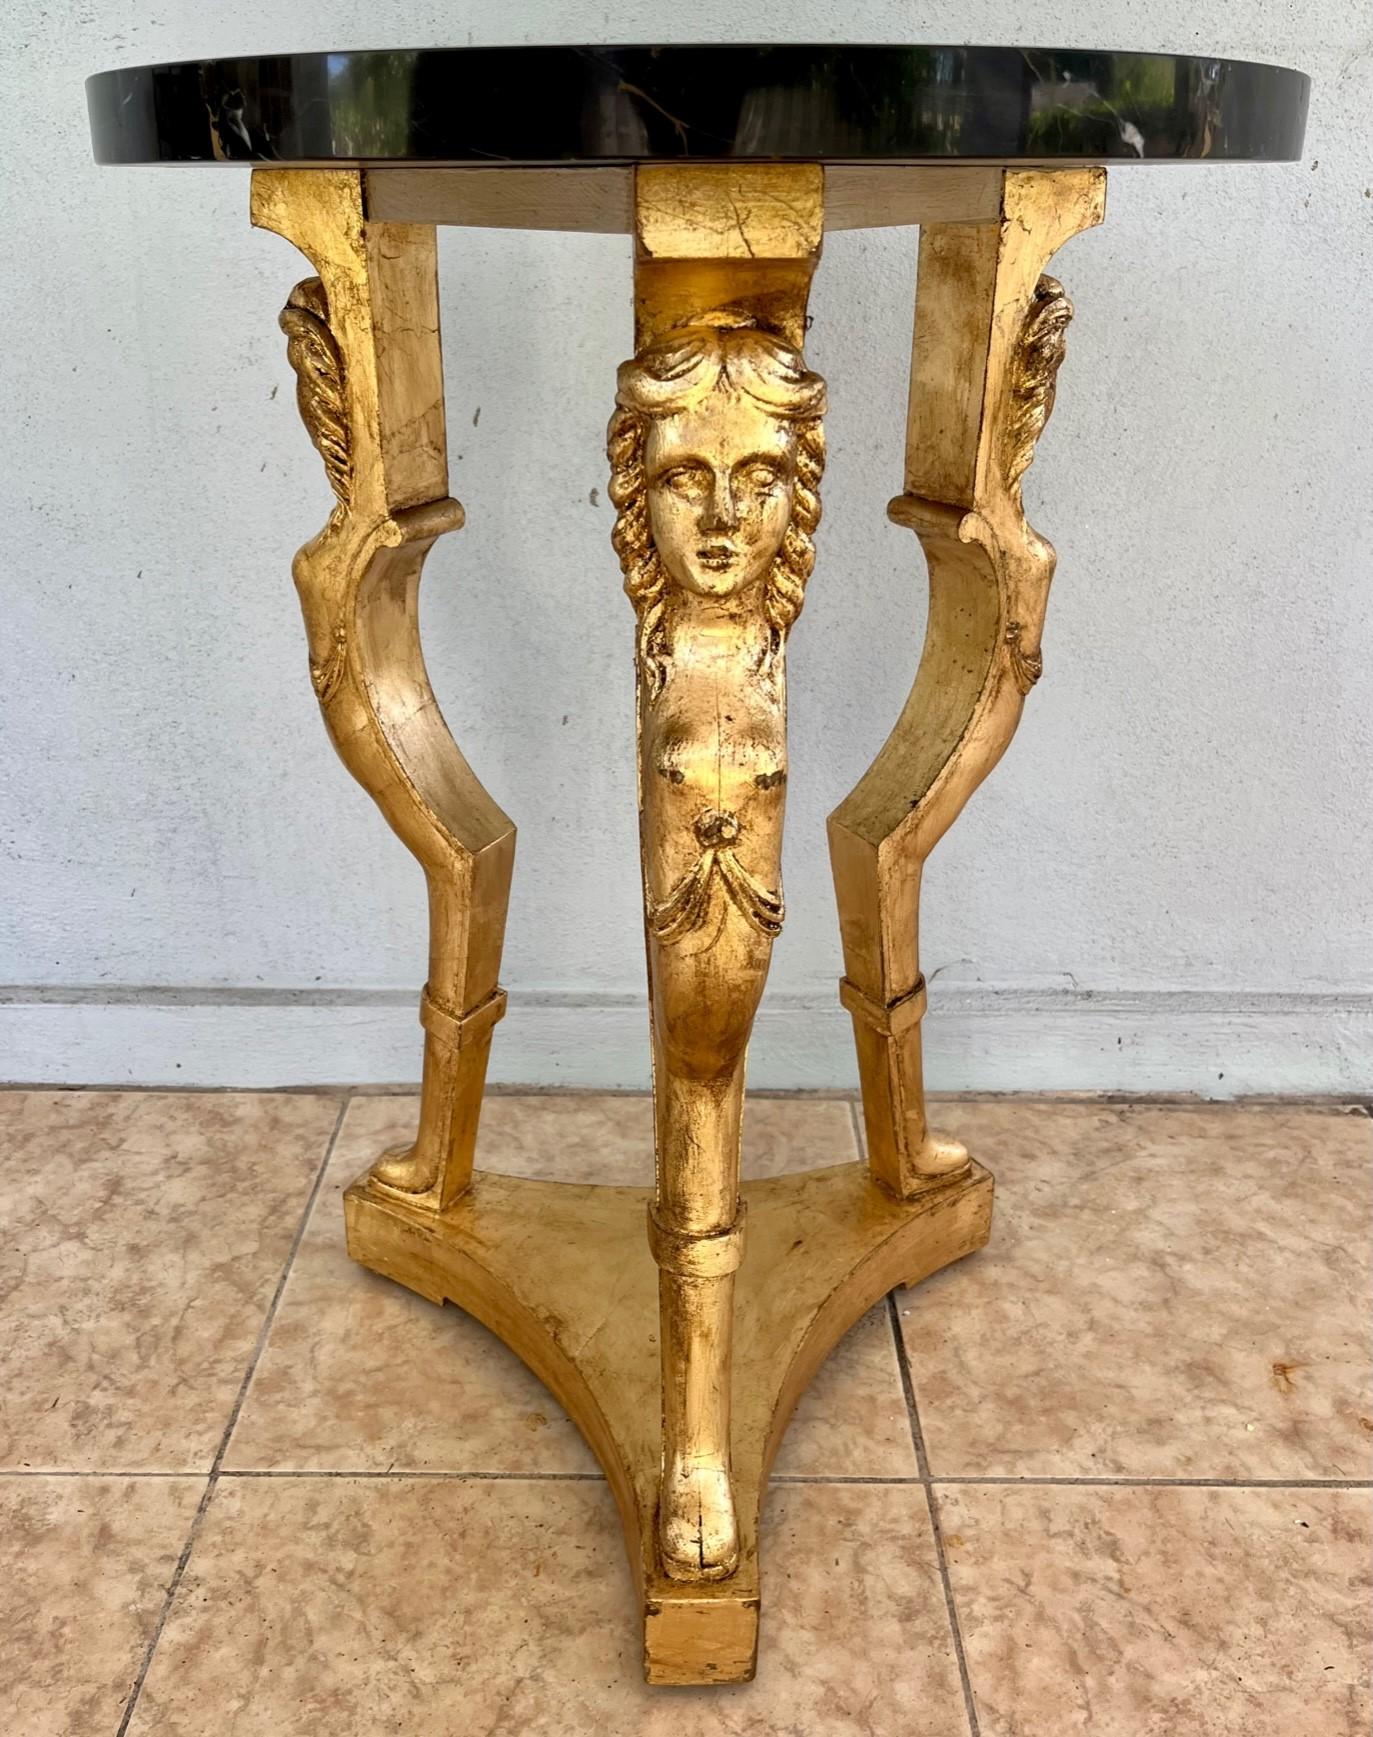 French 19th century Grand Tour neoclassical Giltwood Gueridon.

Antique French late 19th century Neoclassical Gueridon. This magnificent Gueridon with slender form and classic female caryatids demonstrates the stylistic influence of the Louis XVI